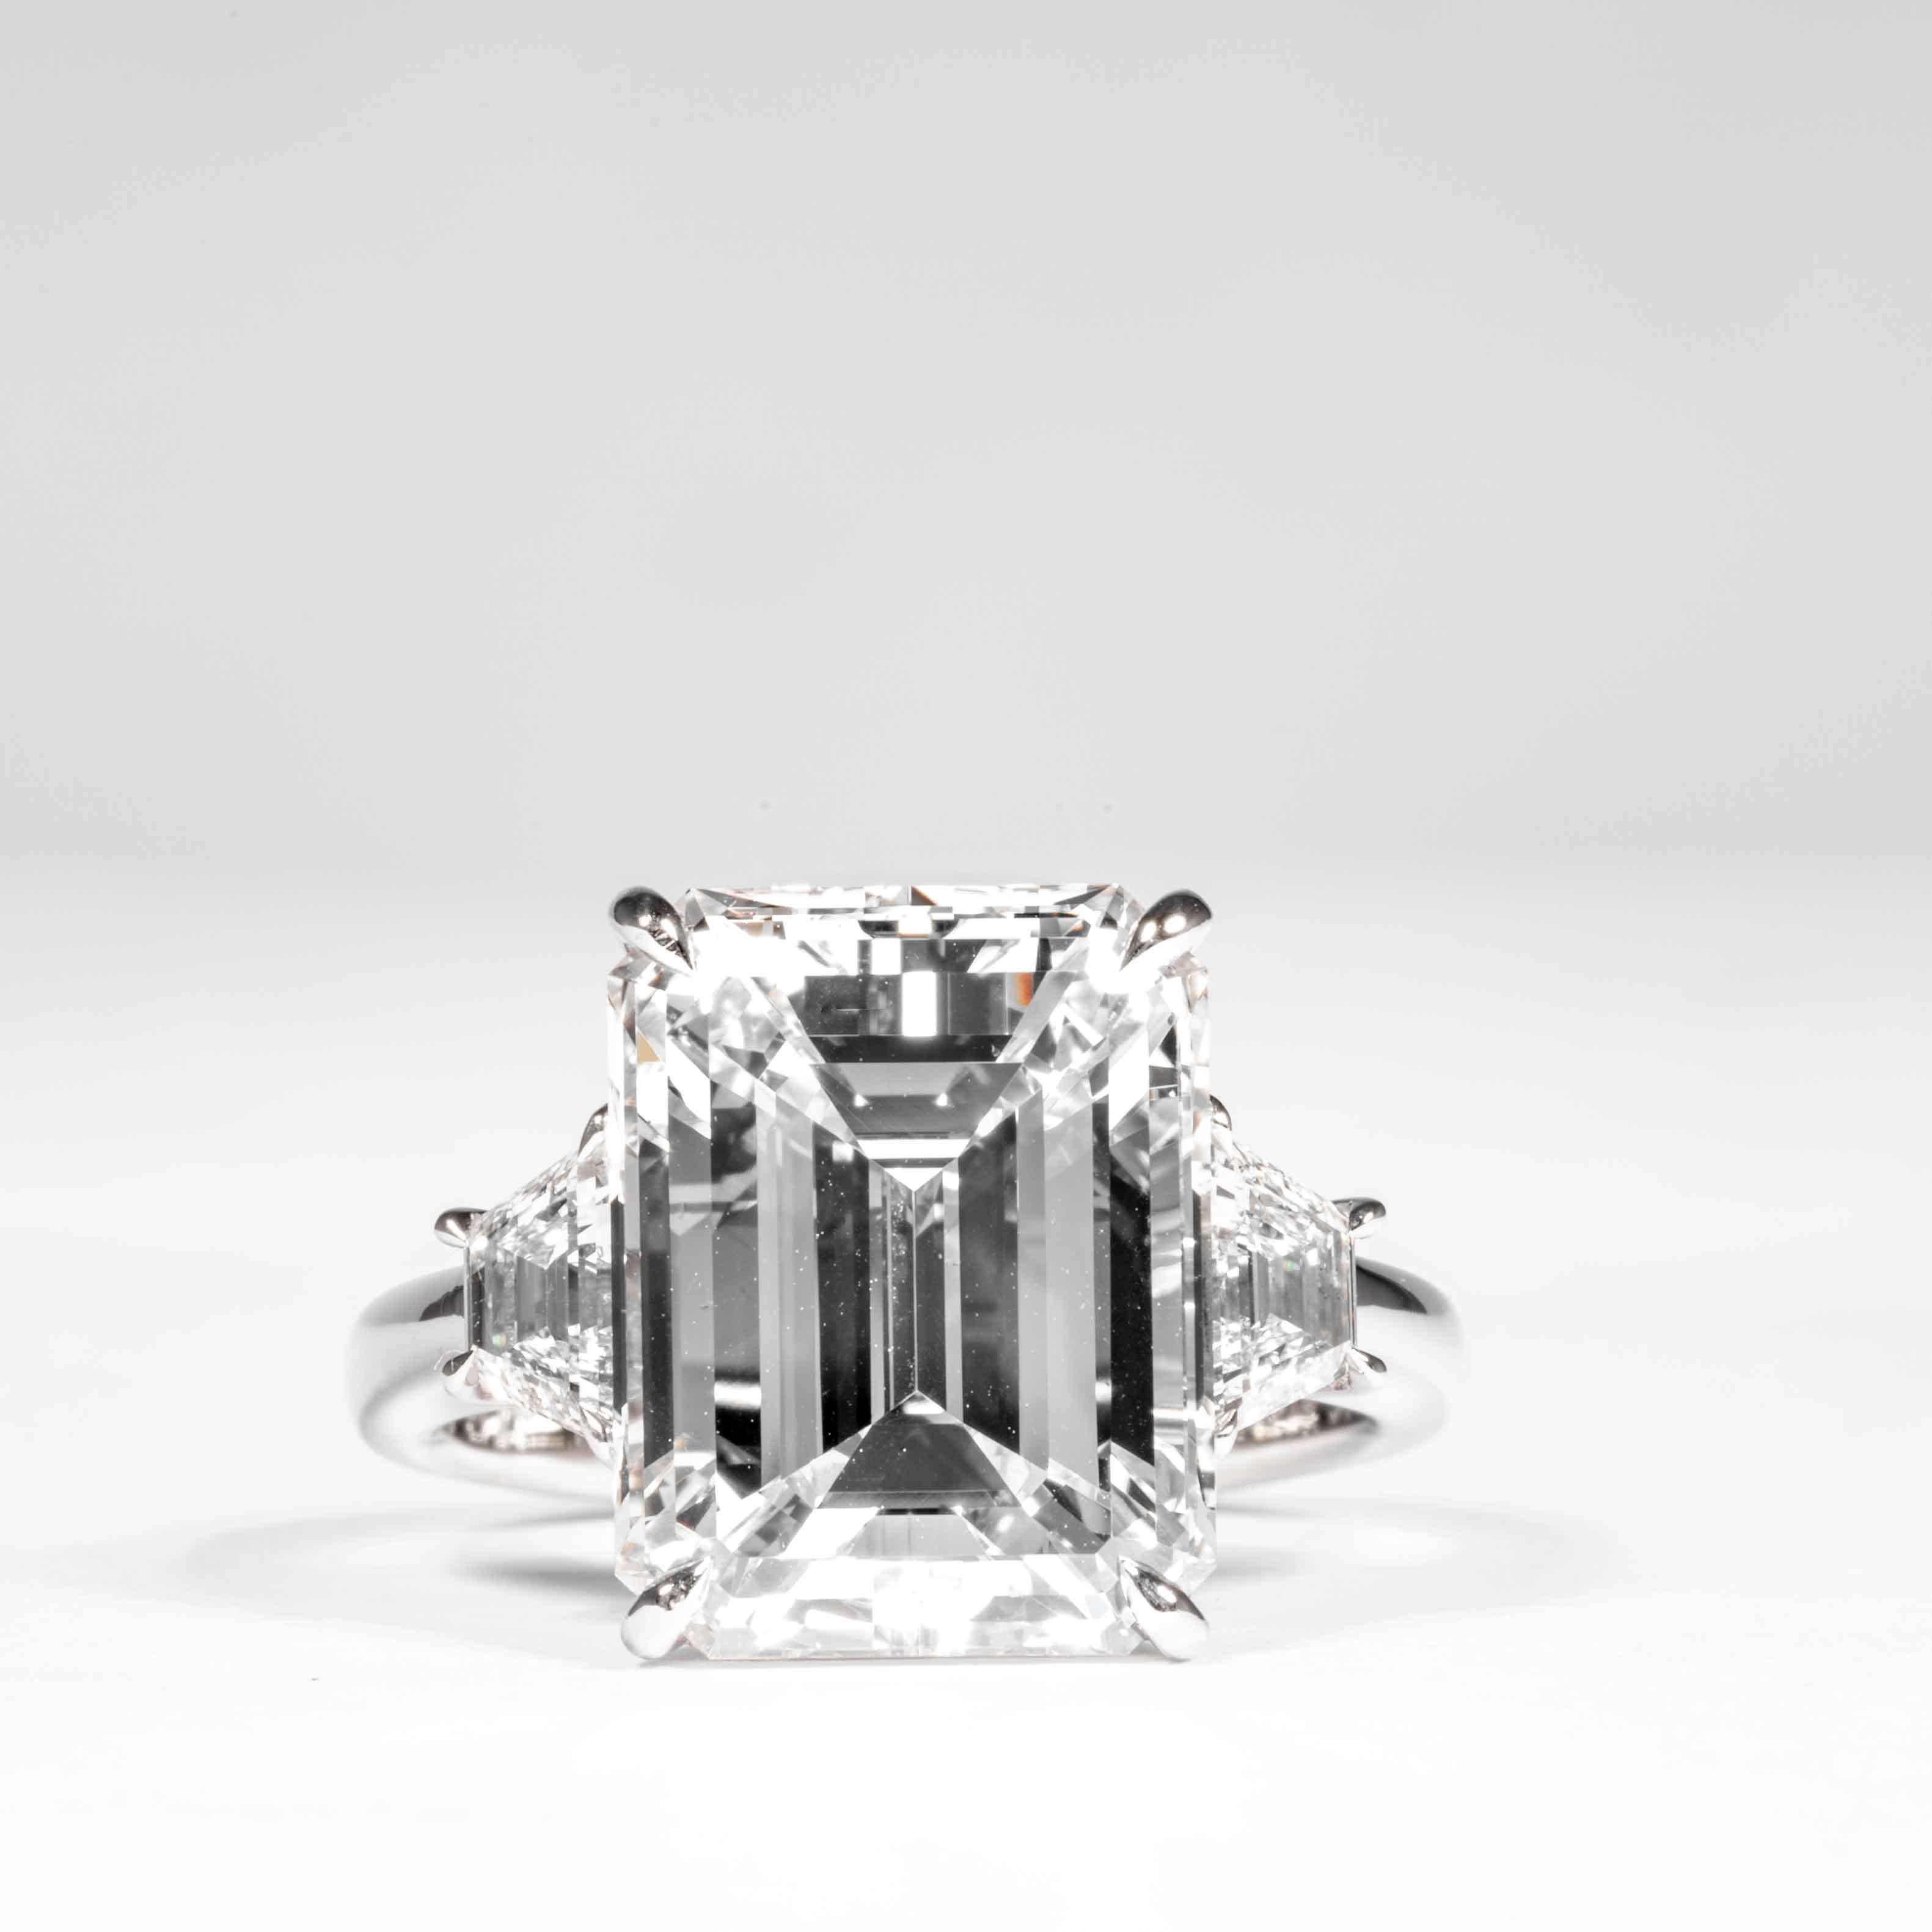 This 3-Stone diamond ring is offered by Shreve, Crump & Low. This 8.97 carat GIA Certified G VS2 emerald cut diamond measuring 13.70 x 10.64 x 6.95mm is custom set in a handcrafted Shreve, Crump & Low platinum 3-stone ring. The 8.97 carat emerald